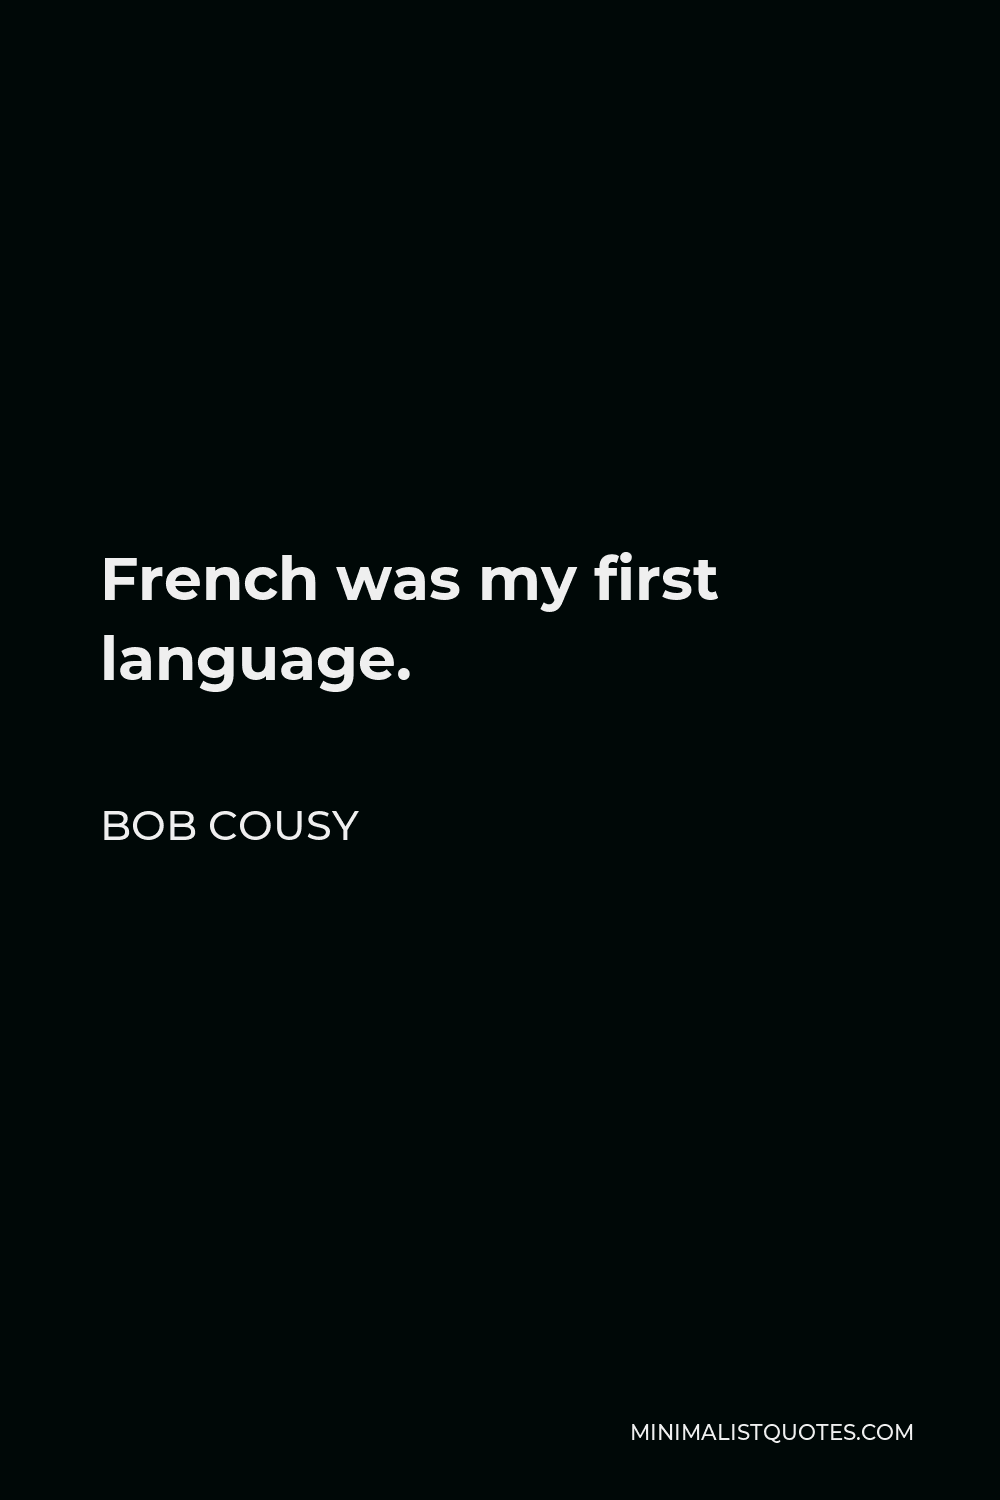 Bob Cousy Quote - French was my first language.